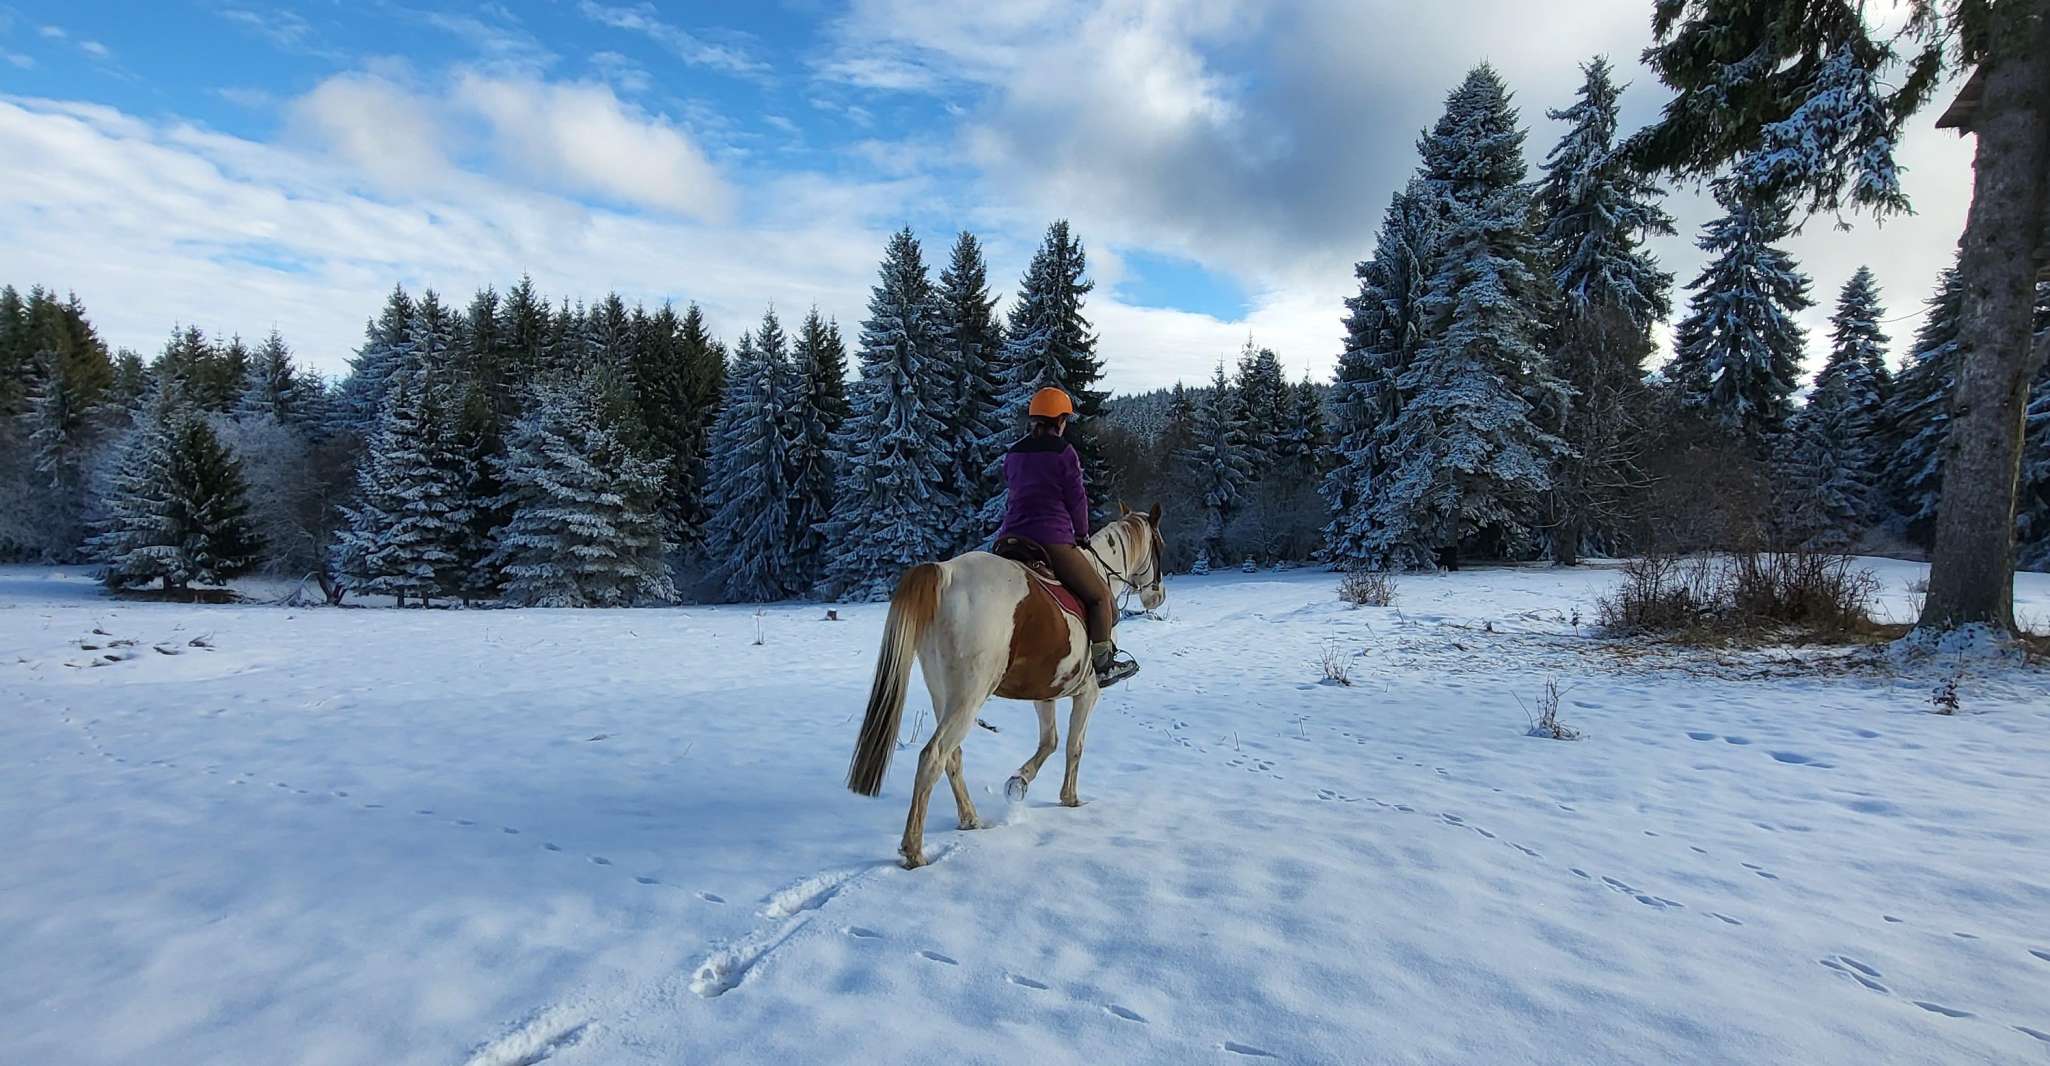 From Borovets, Horse Riding Experience - Housity